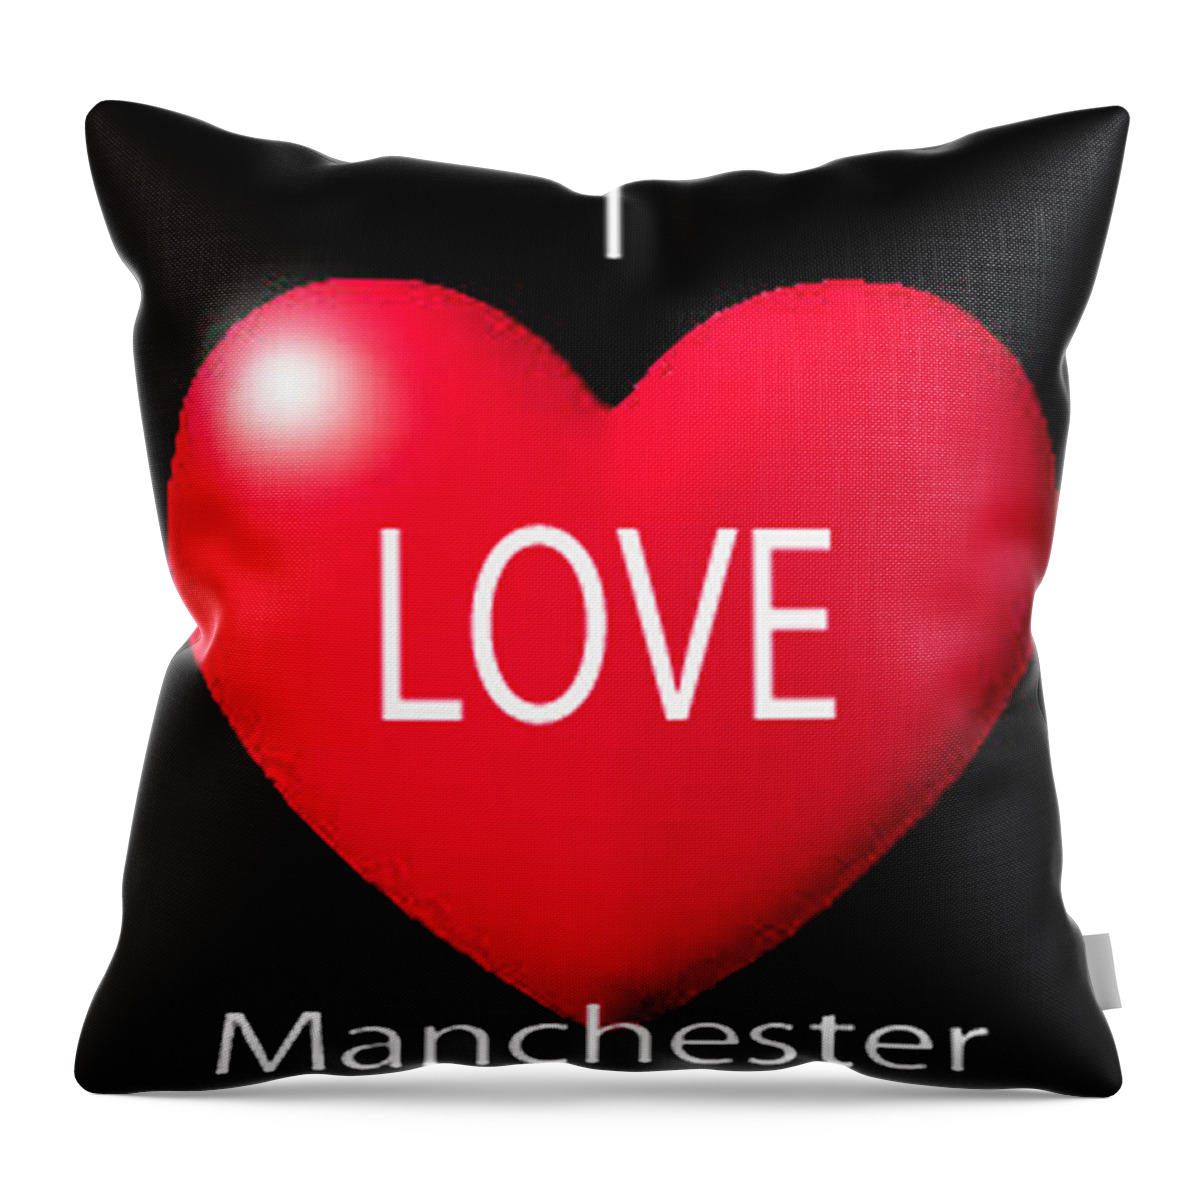 Art' Photo' Abstract Art' Throw Pillow featuring the digital art I Love Manchester by The Lovelock experience